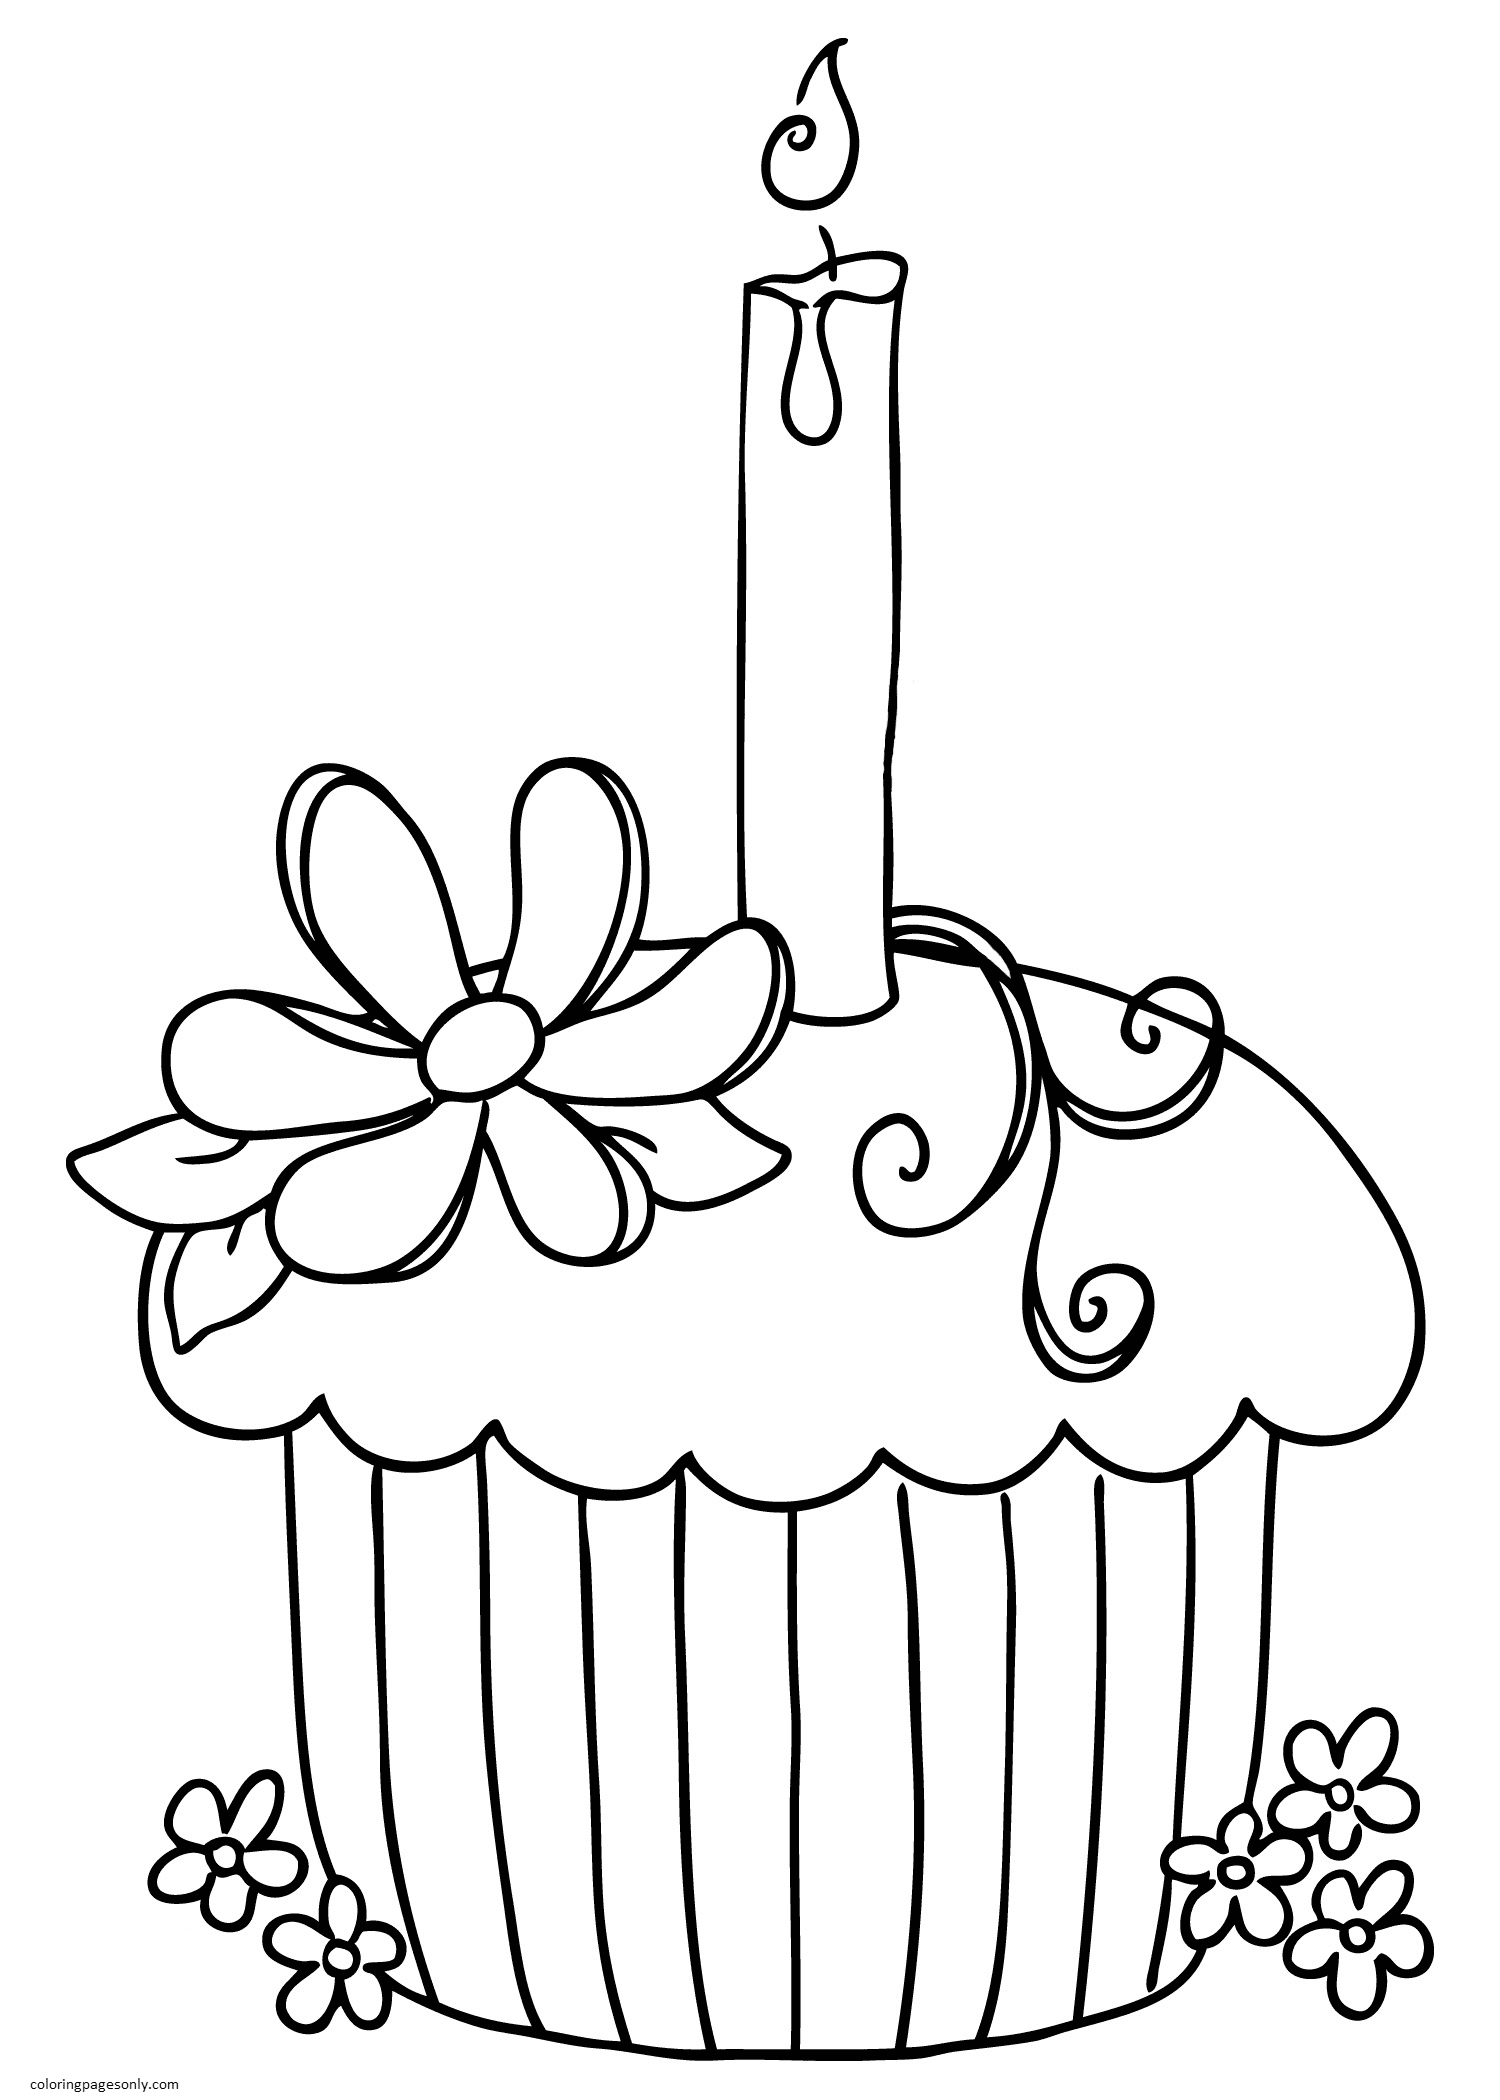 Cupcake 4 Coloring Pages